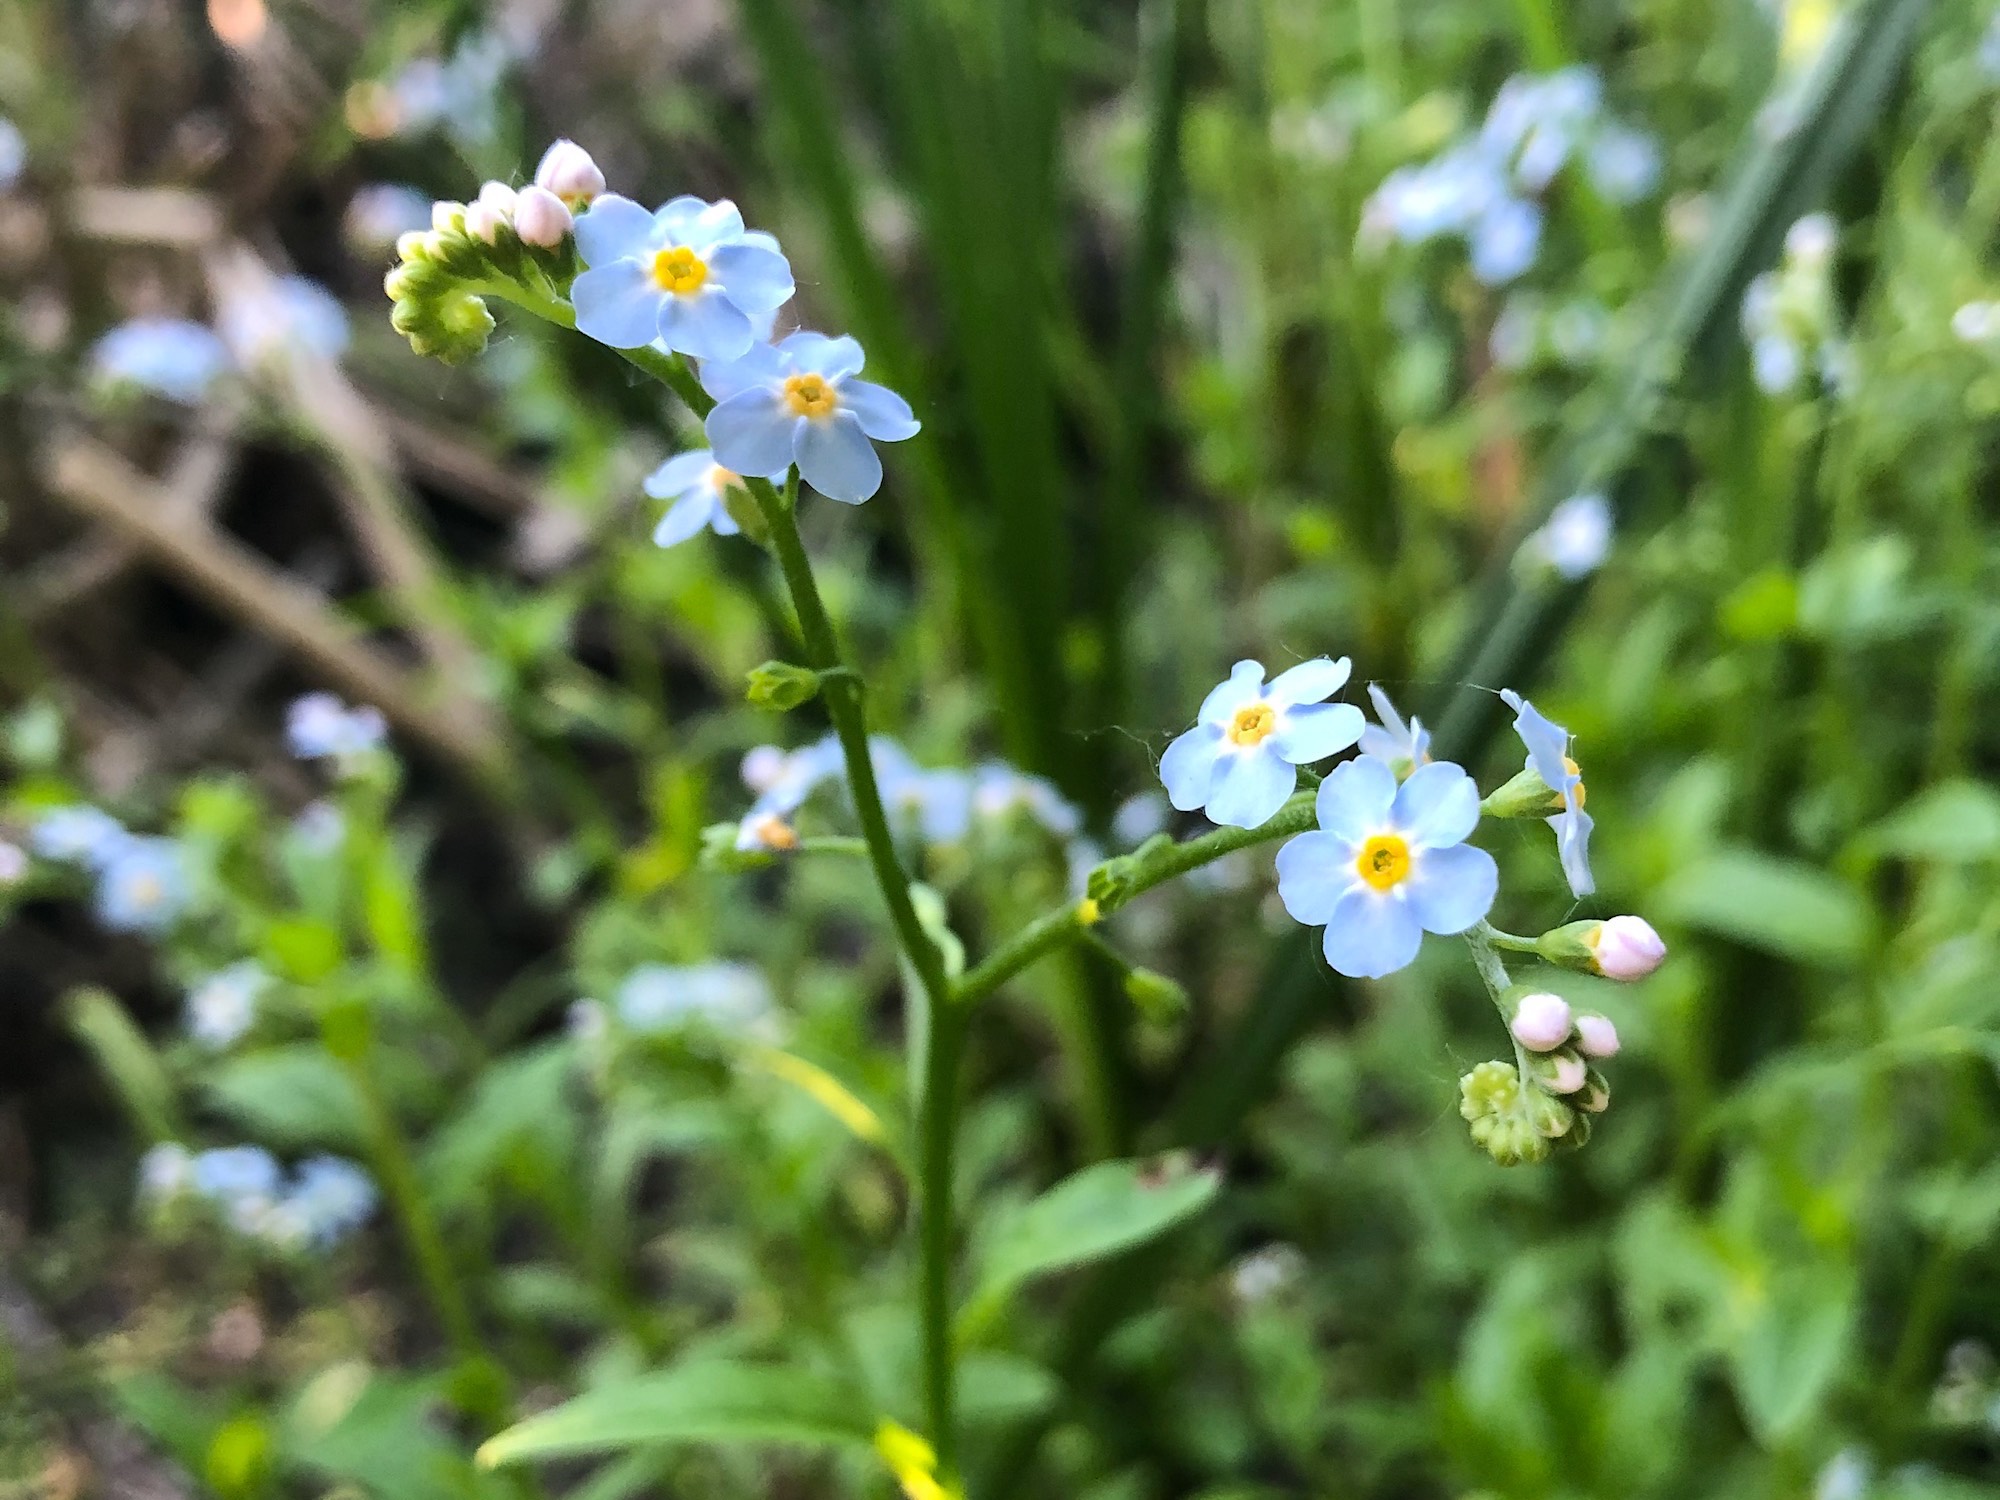 True Forget-me-not or Water Forget-me-not.